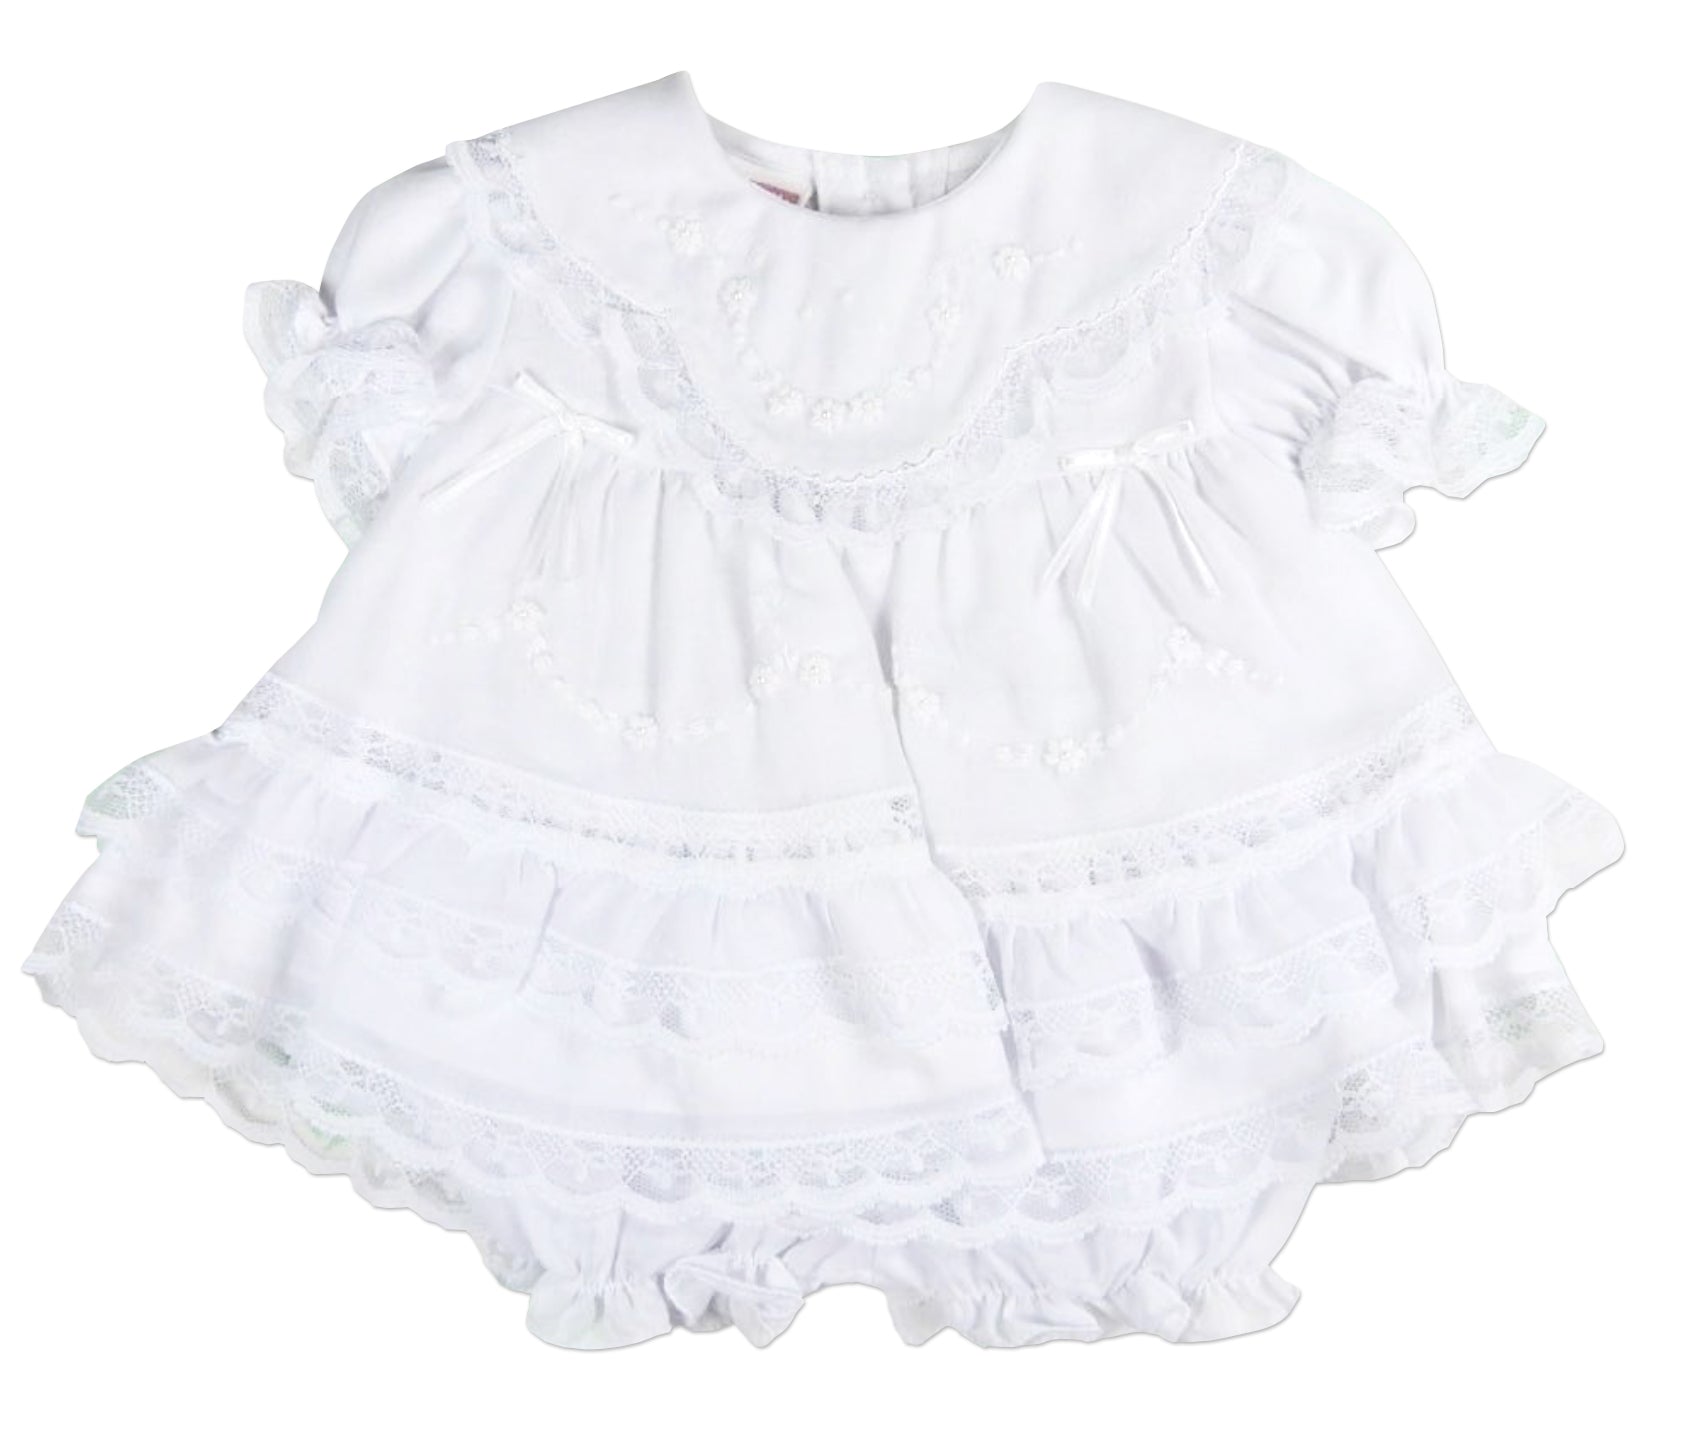 Baby Girls White Frilly Cotton Lace Pants Over Nappy Bow Knickers